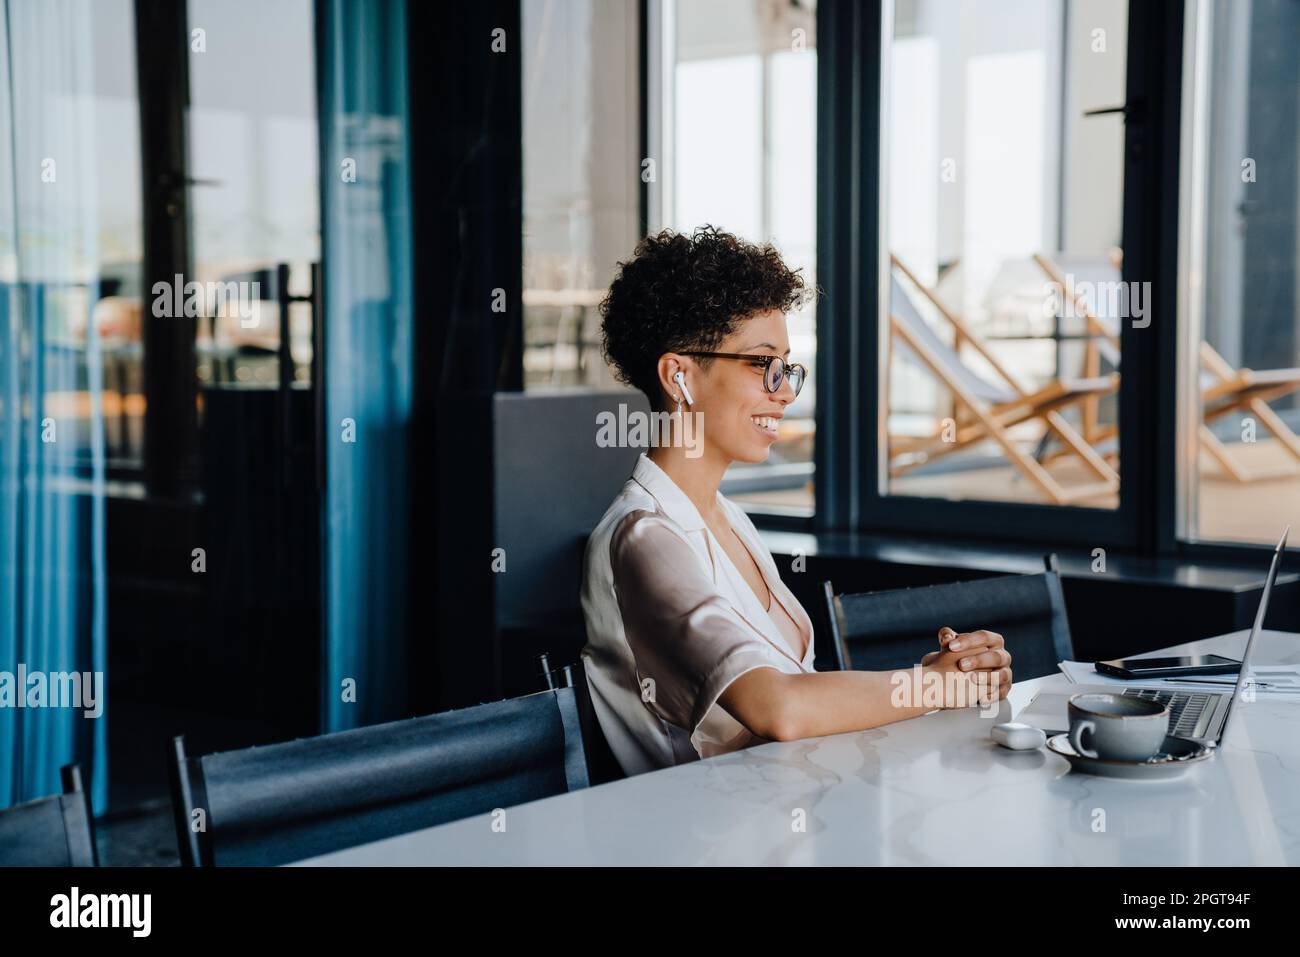 Middle-aged businesswoman smiling while working on laptop in office Stock Photo